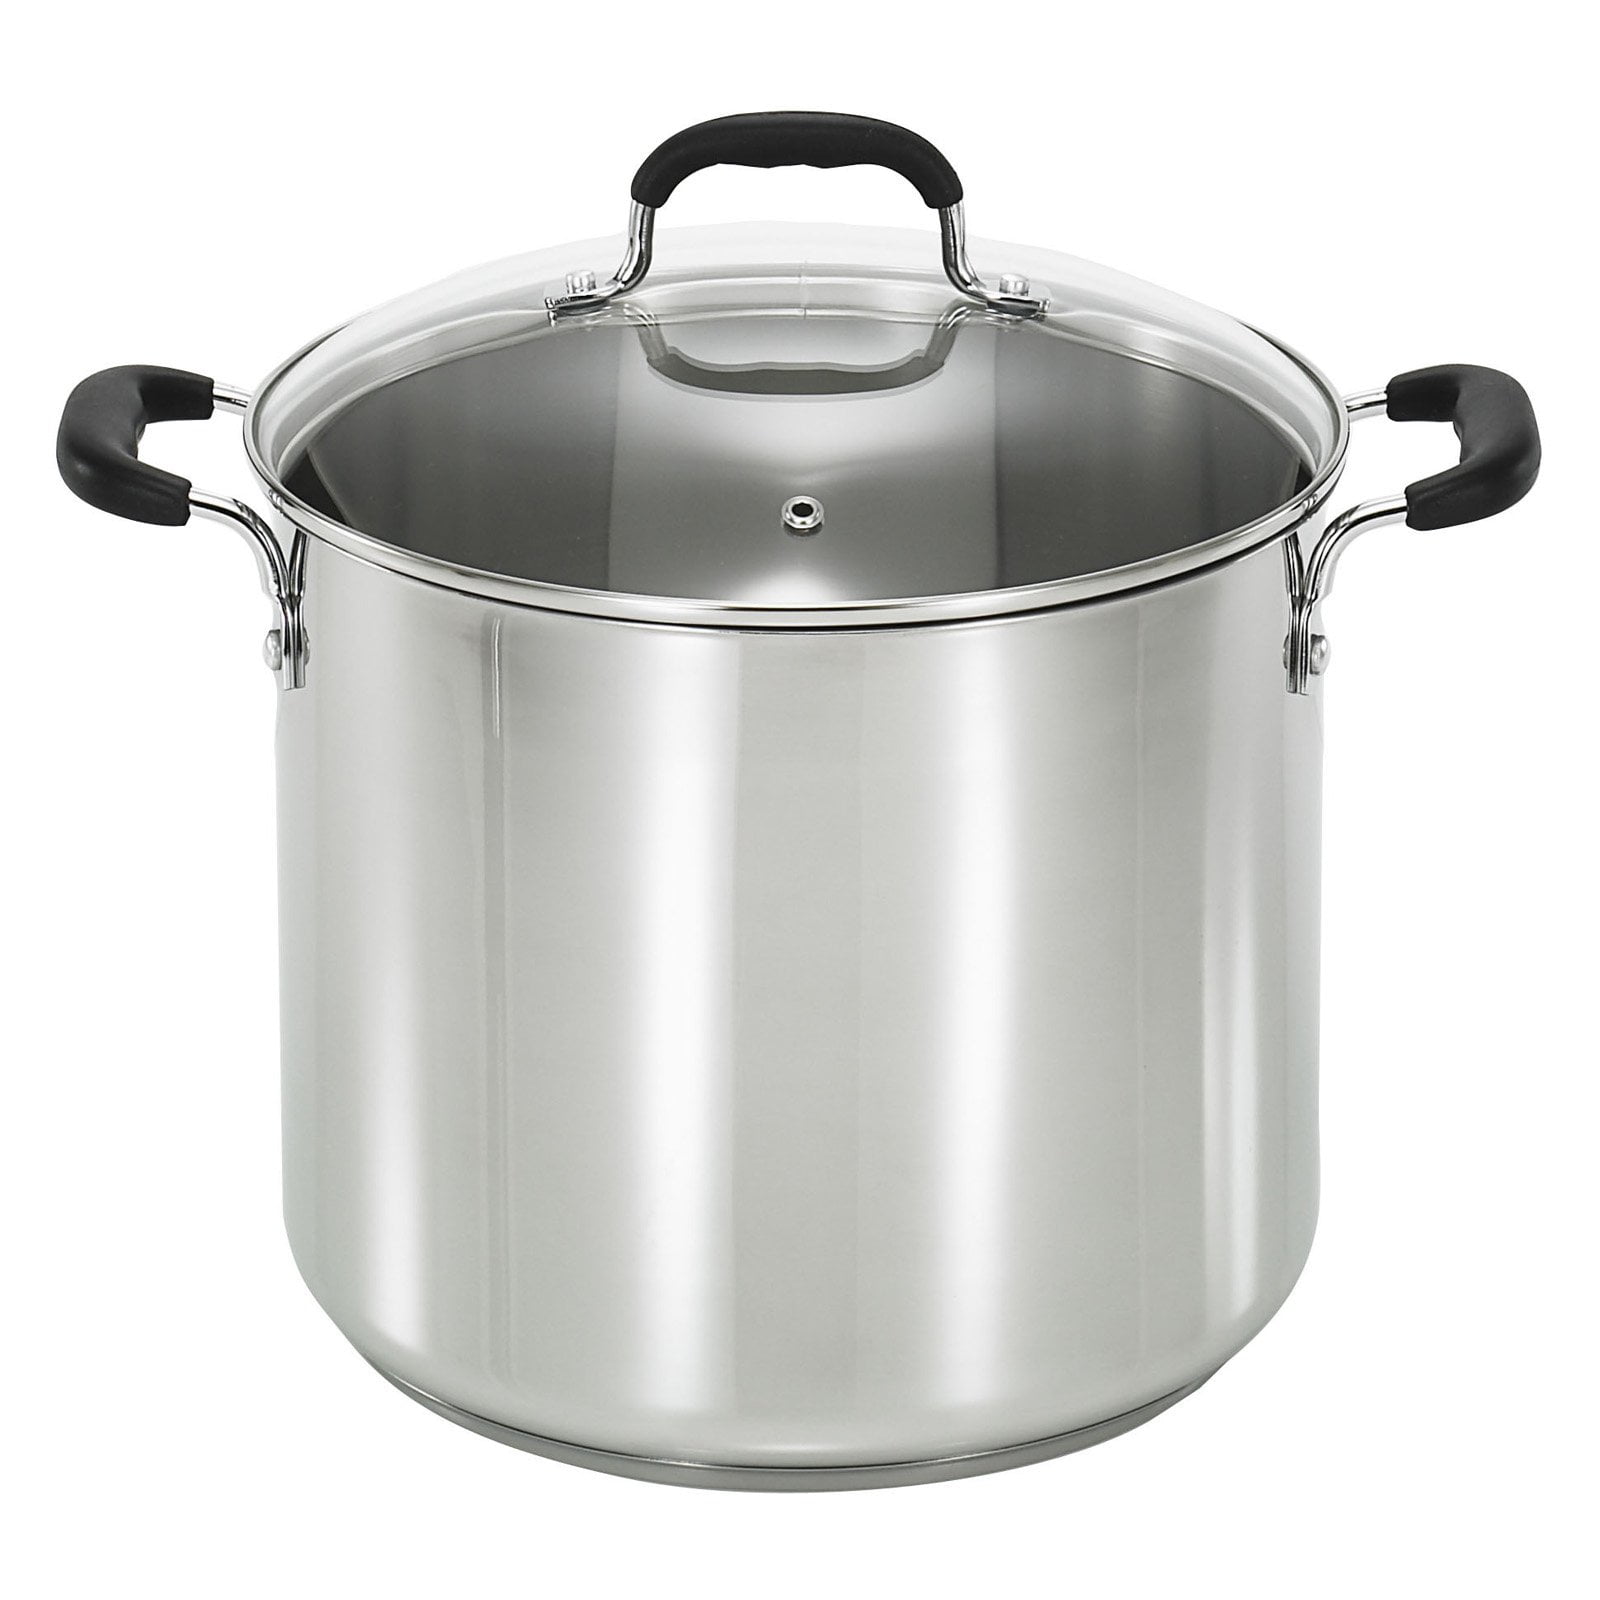 Details about   Stainless Steel Stock Pot 8 QT Quart 2 Gallon Soup Chili Pasta Beer Brew NOTE* 